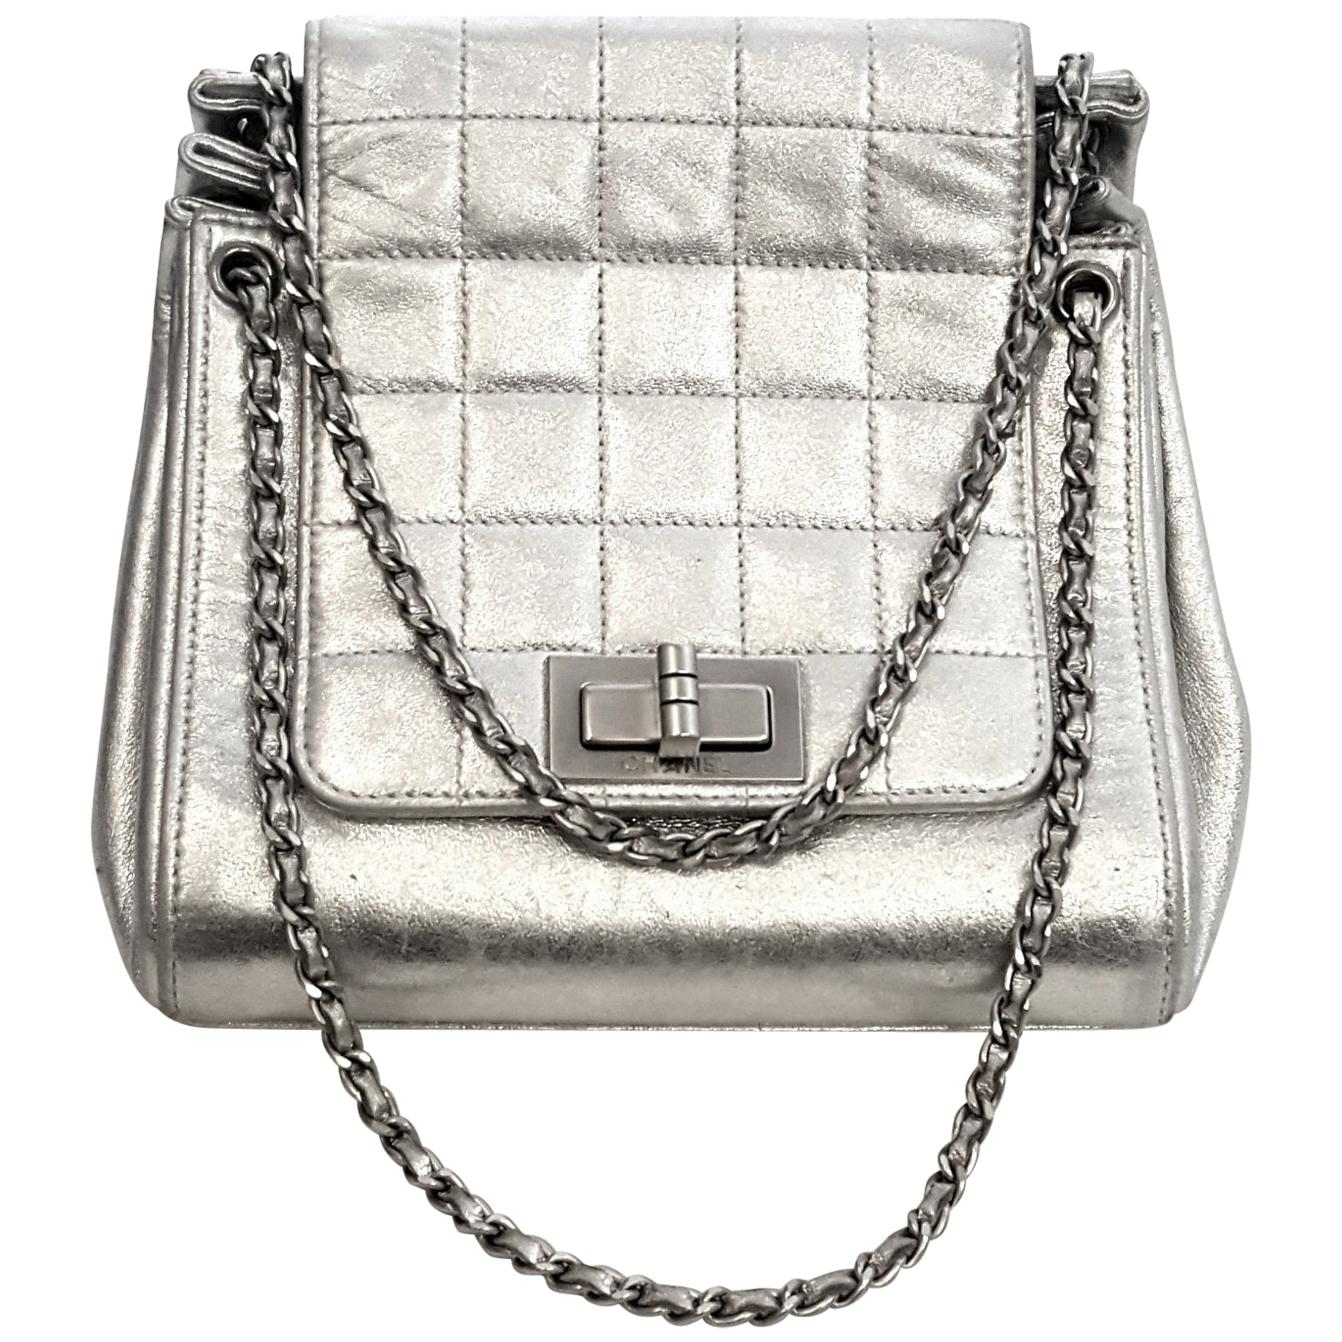 Chanel Mademoiselle Silver Metallic Square Quilt Chain Link Strap Mini Bag For Sale